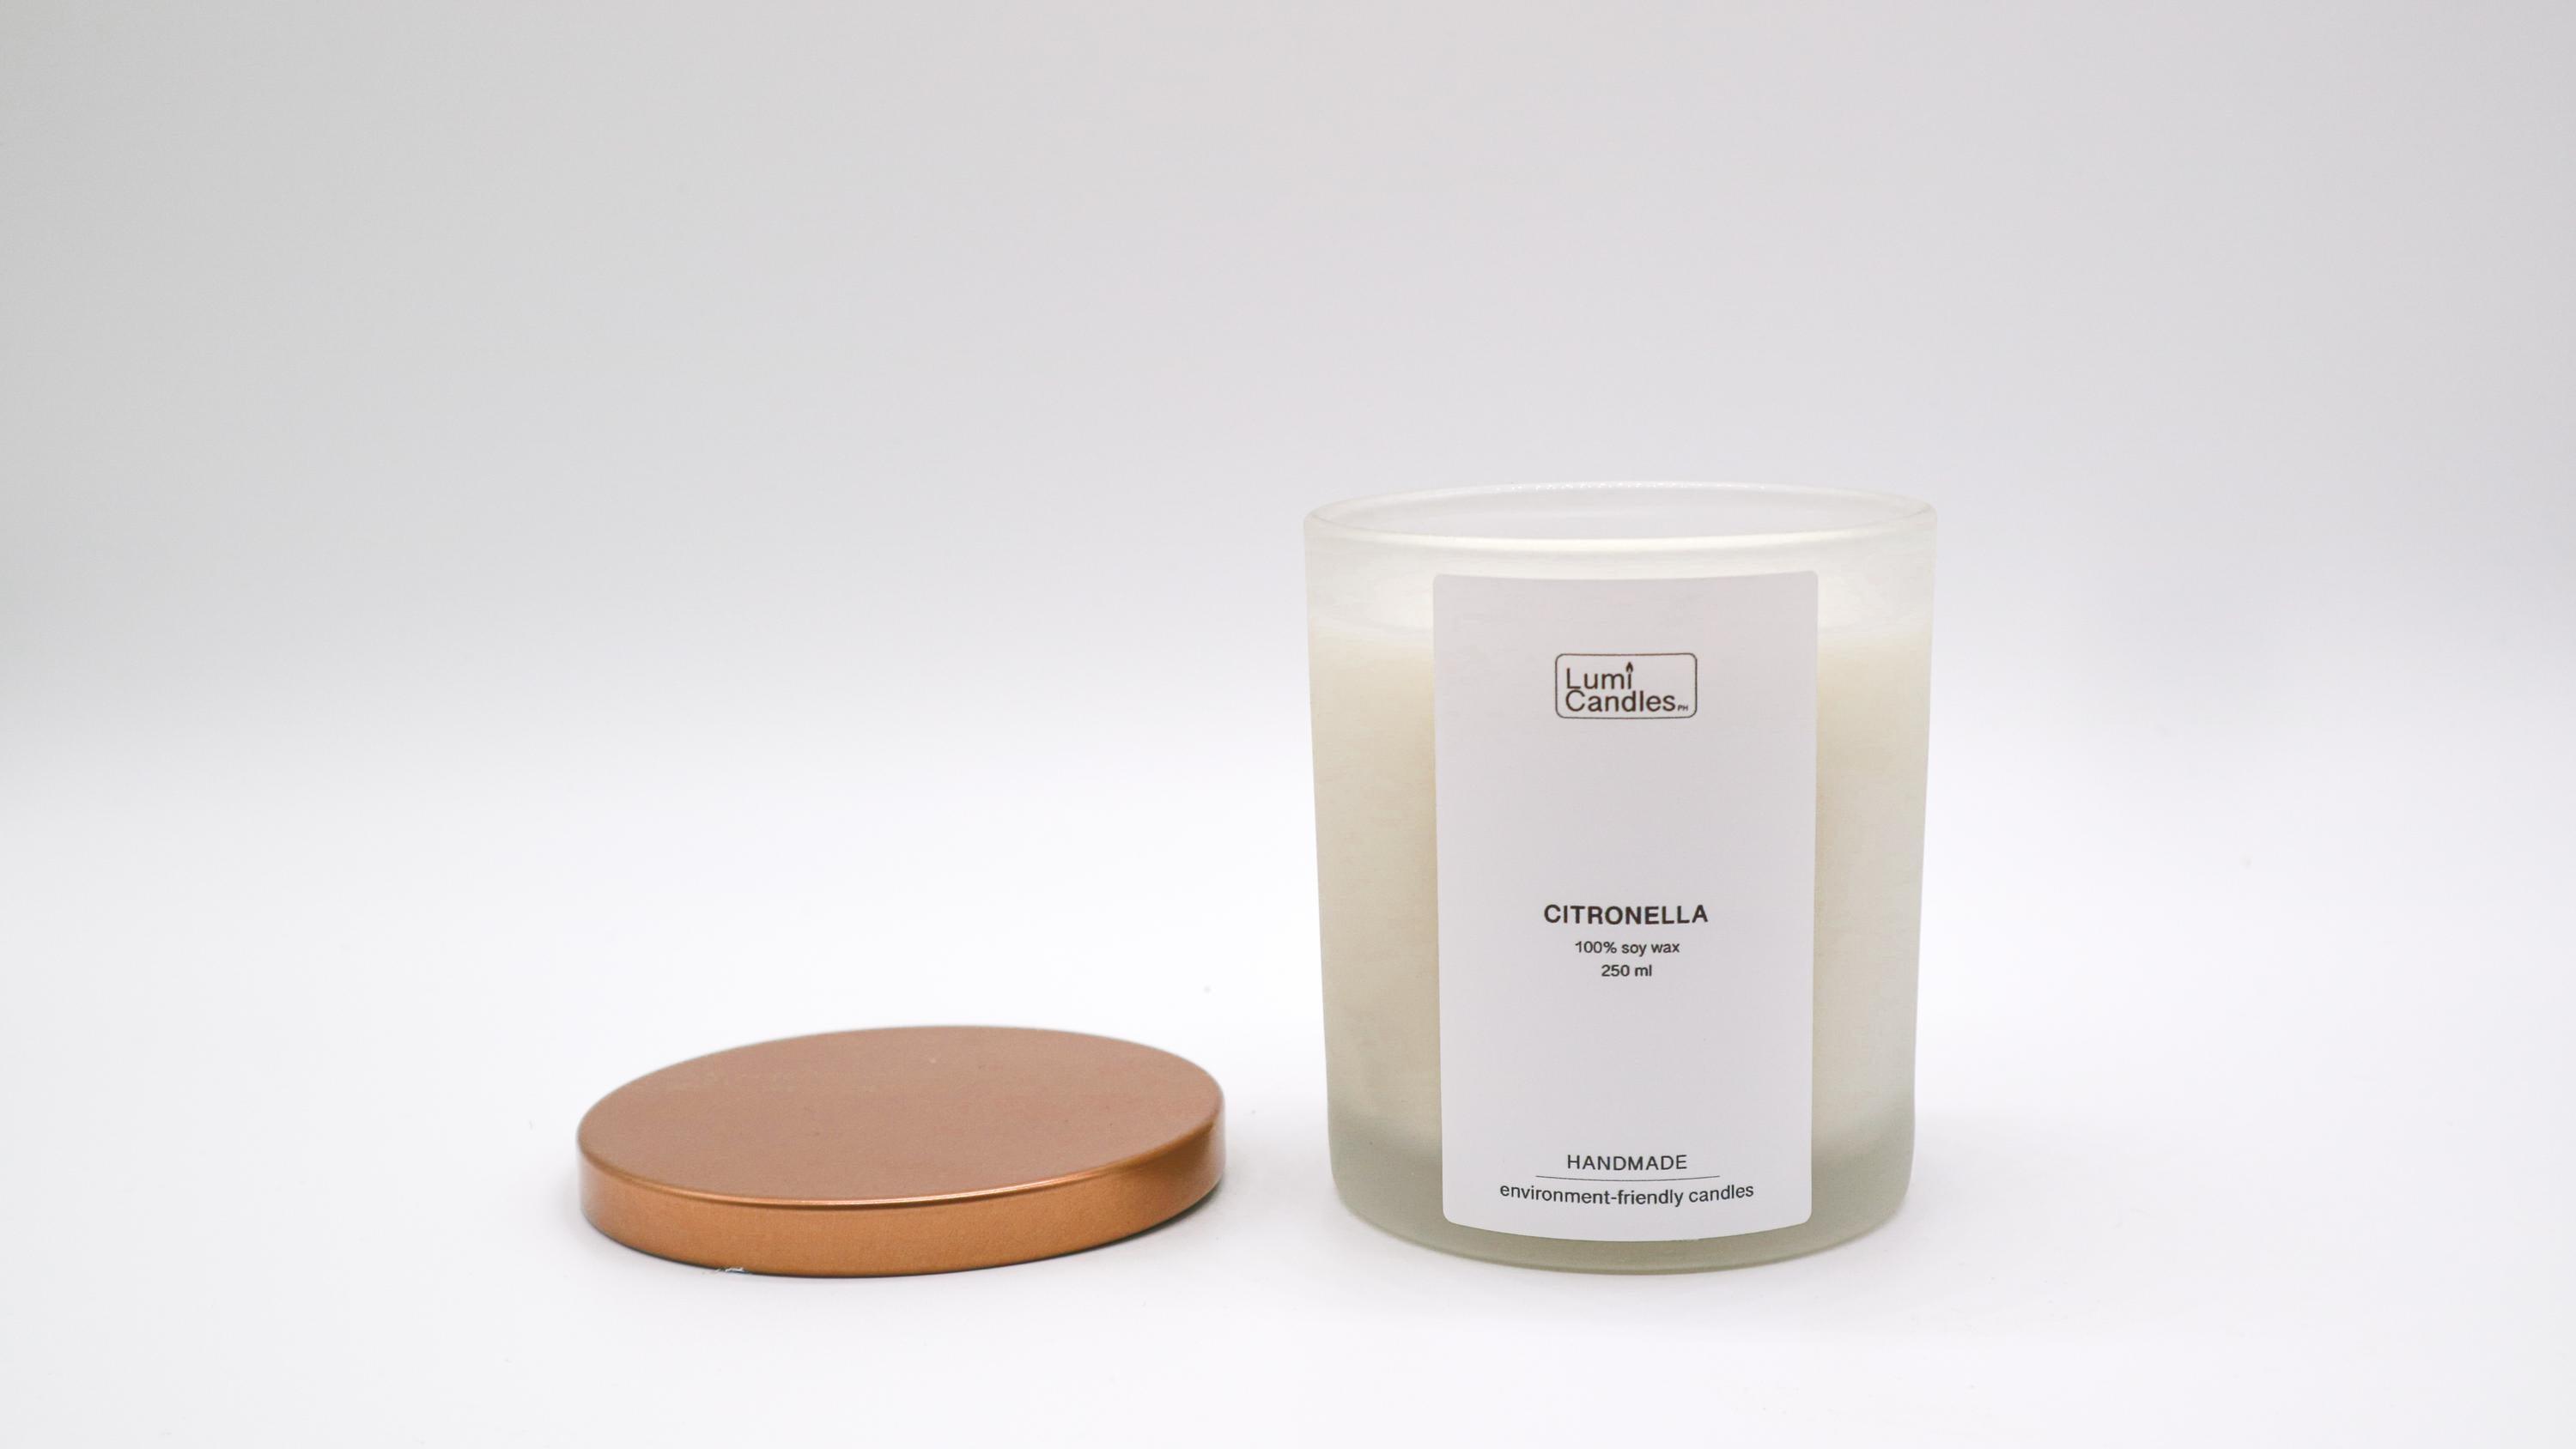 Citronella LUMI scented soy candle at 250 ML by LUMI Candles PH